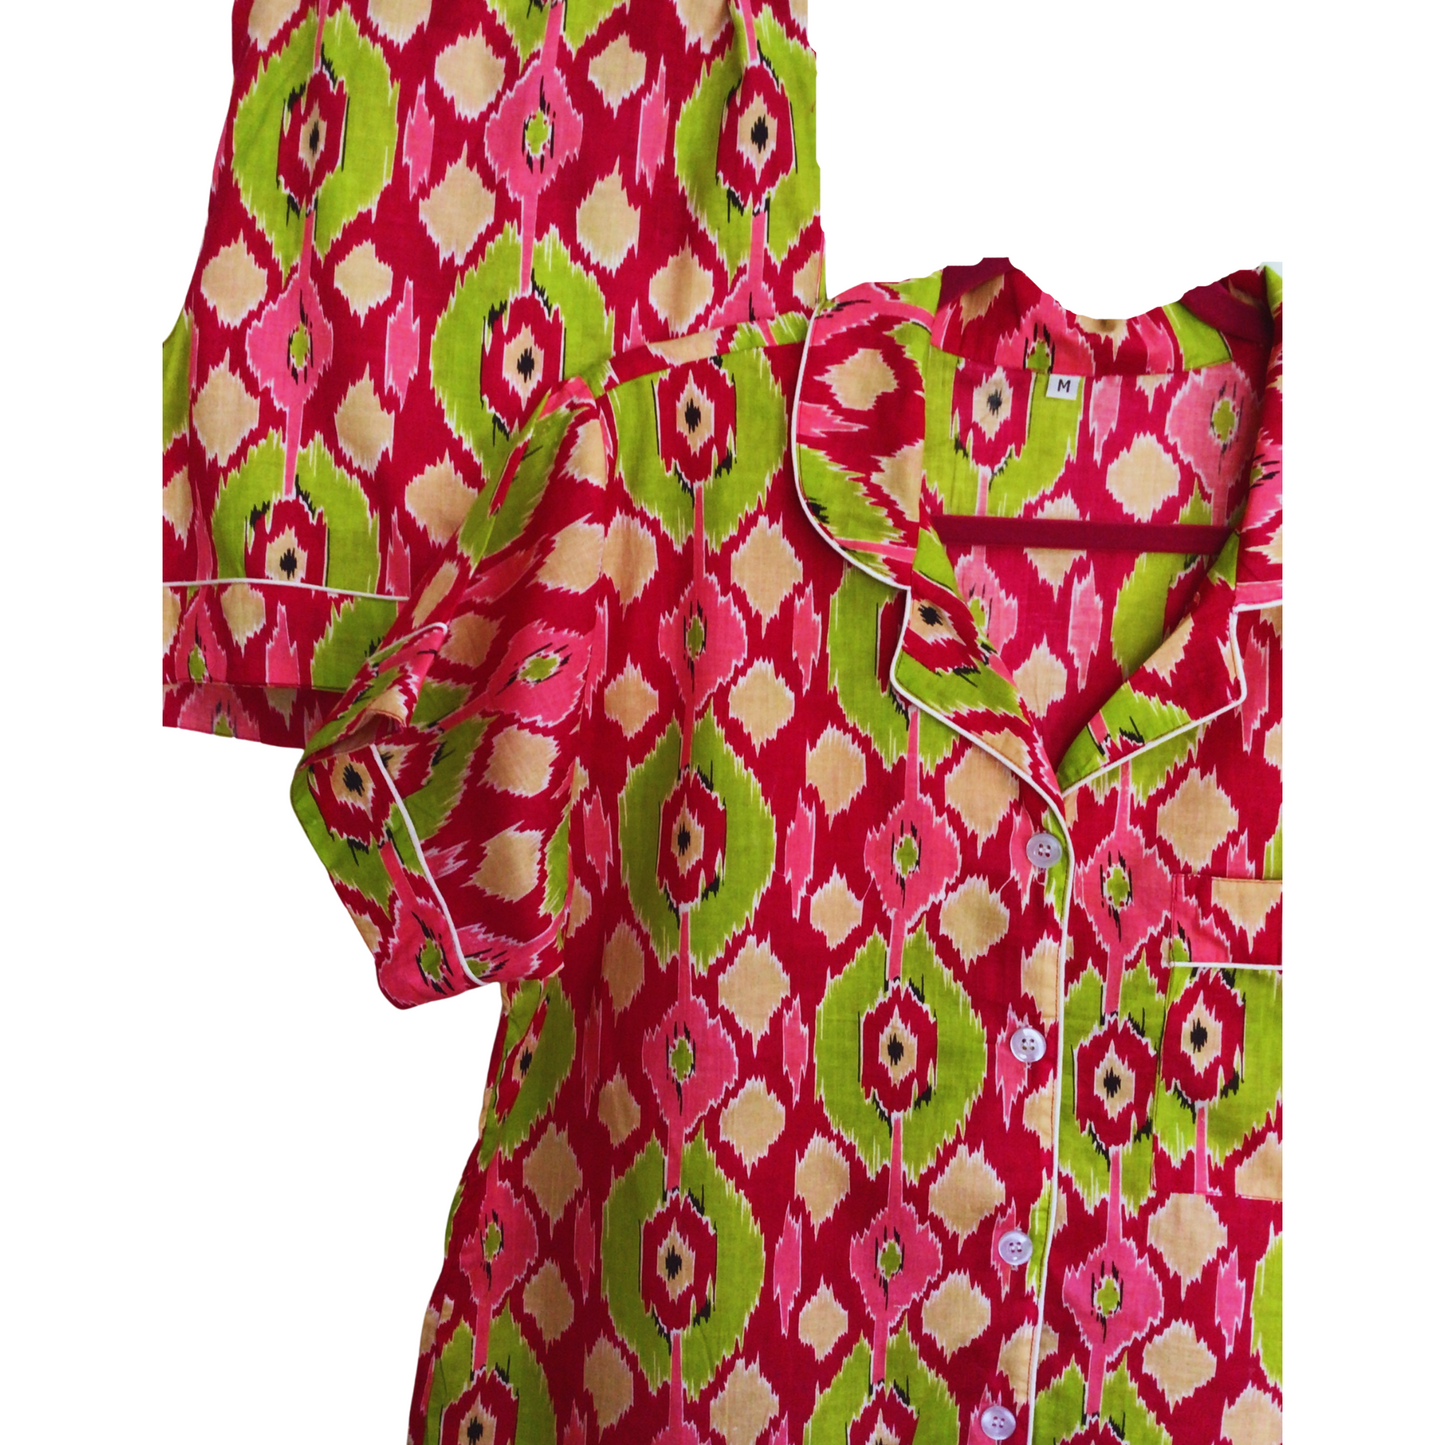 pink pyjamas, pink shorts pjs, bright pink pyjamas, Luxury loungewear, 100% fine cotton pjs. Fuschia pink and Zingy lime green Ikat ladies pjs Classic pyjama styling. Short sleeves and shorts with Elasticated waist. Presented in a beautiful cloth gift bag, nightwear made from hand-printed cotton. Fab gifts for women